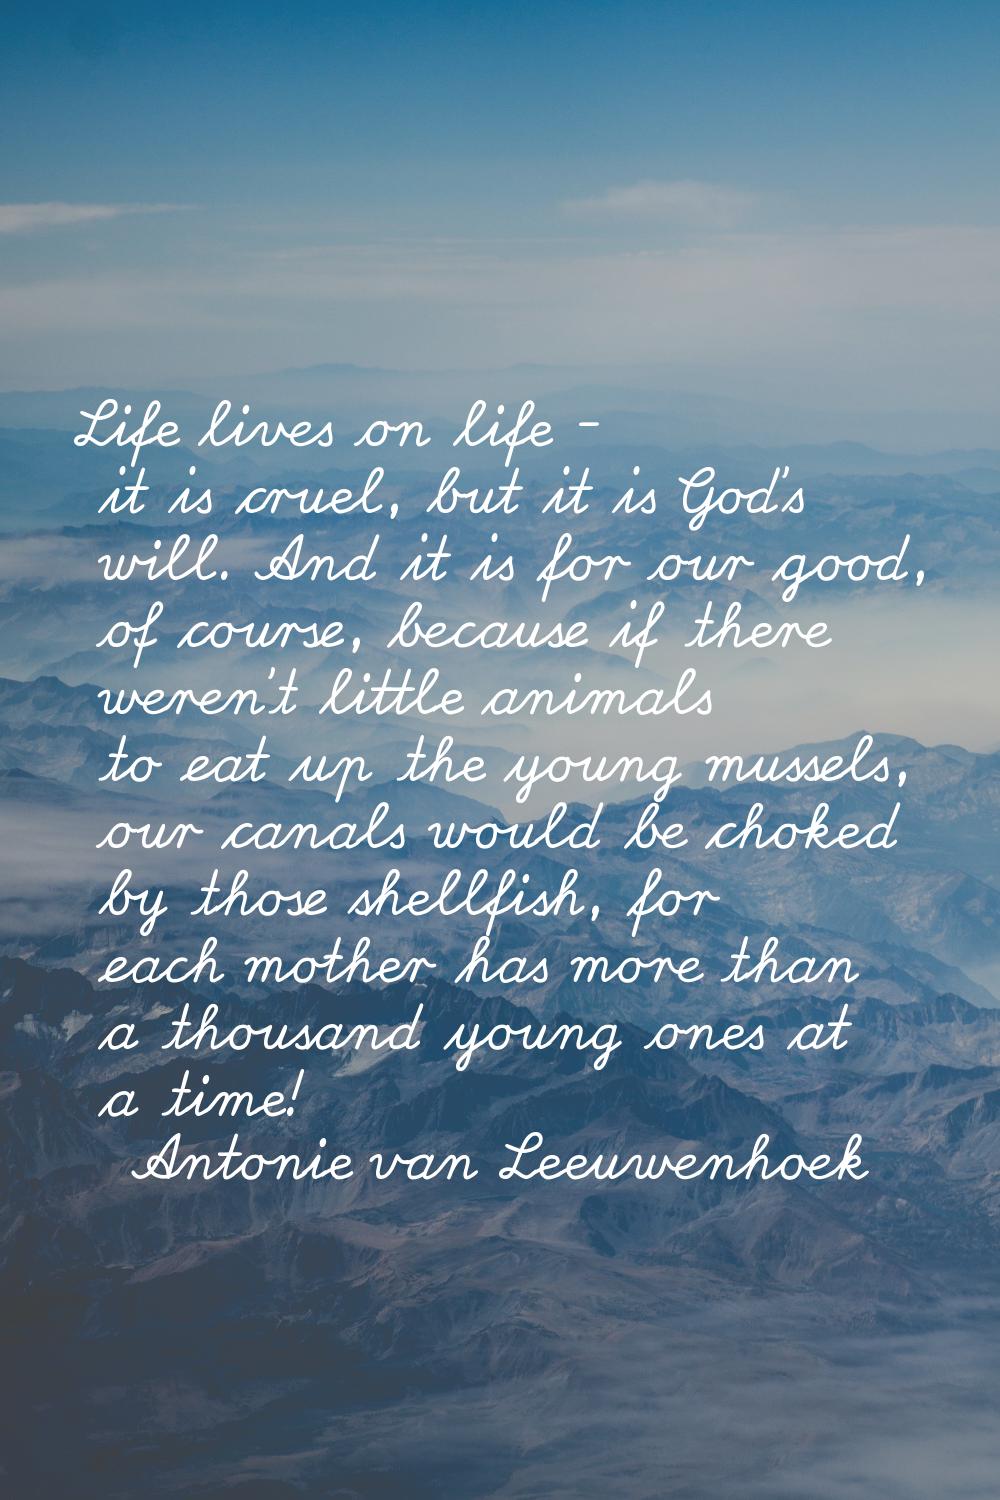 Life lives on life - it is cruel, but it is God's will. And it is for our good, of course, because 